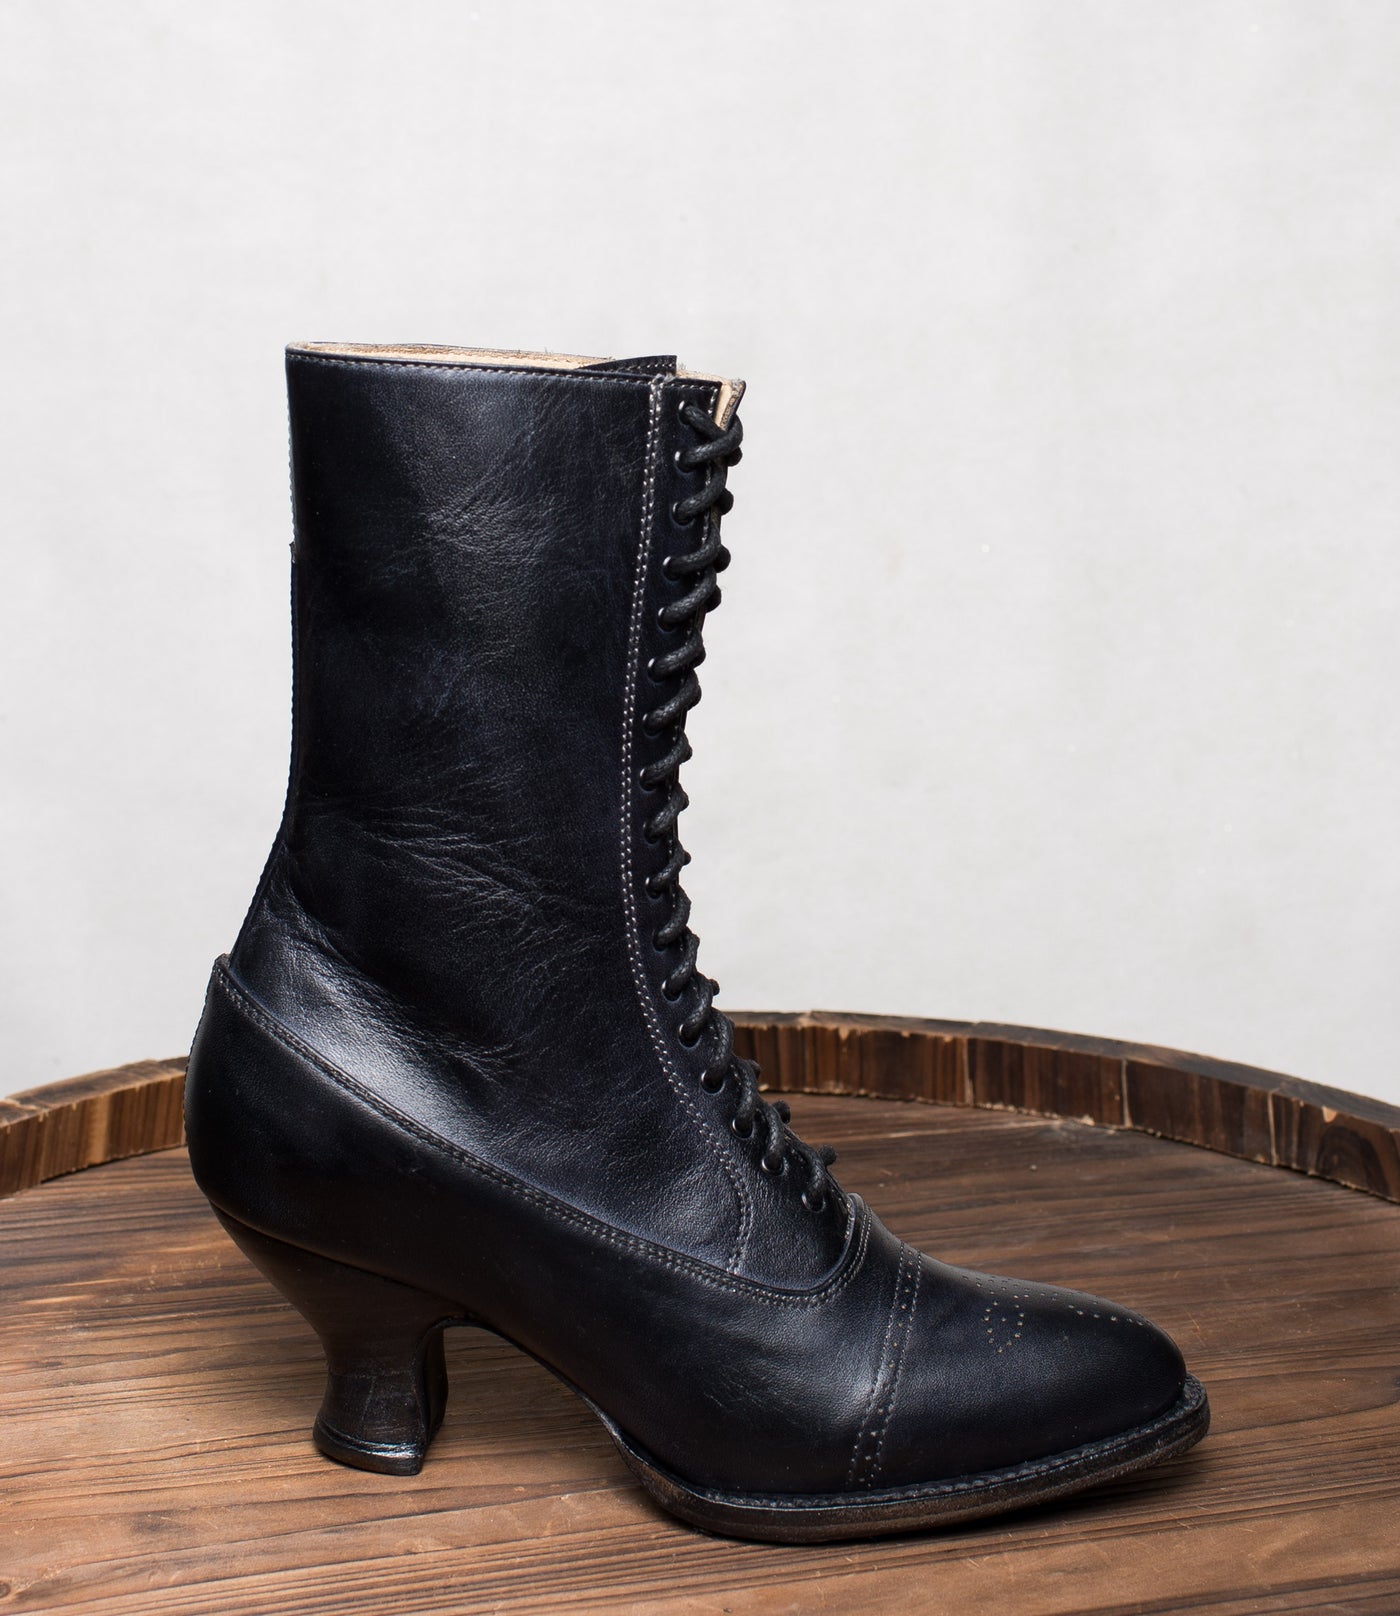 Ariana Victorian Inspired Mid-Calf Leather Boots in Black Rustic 6 / Black